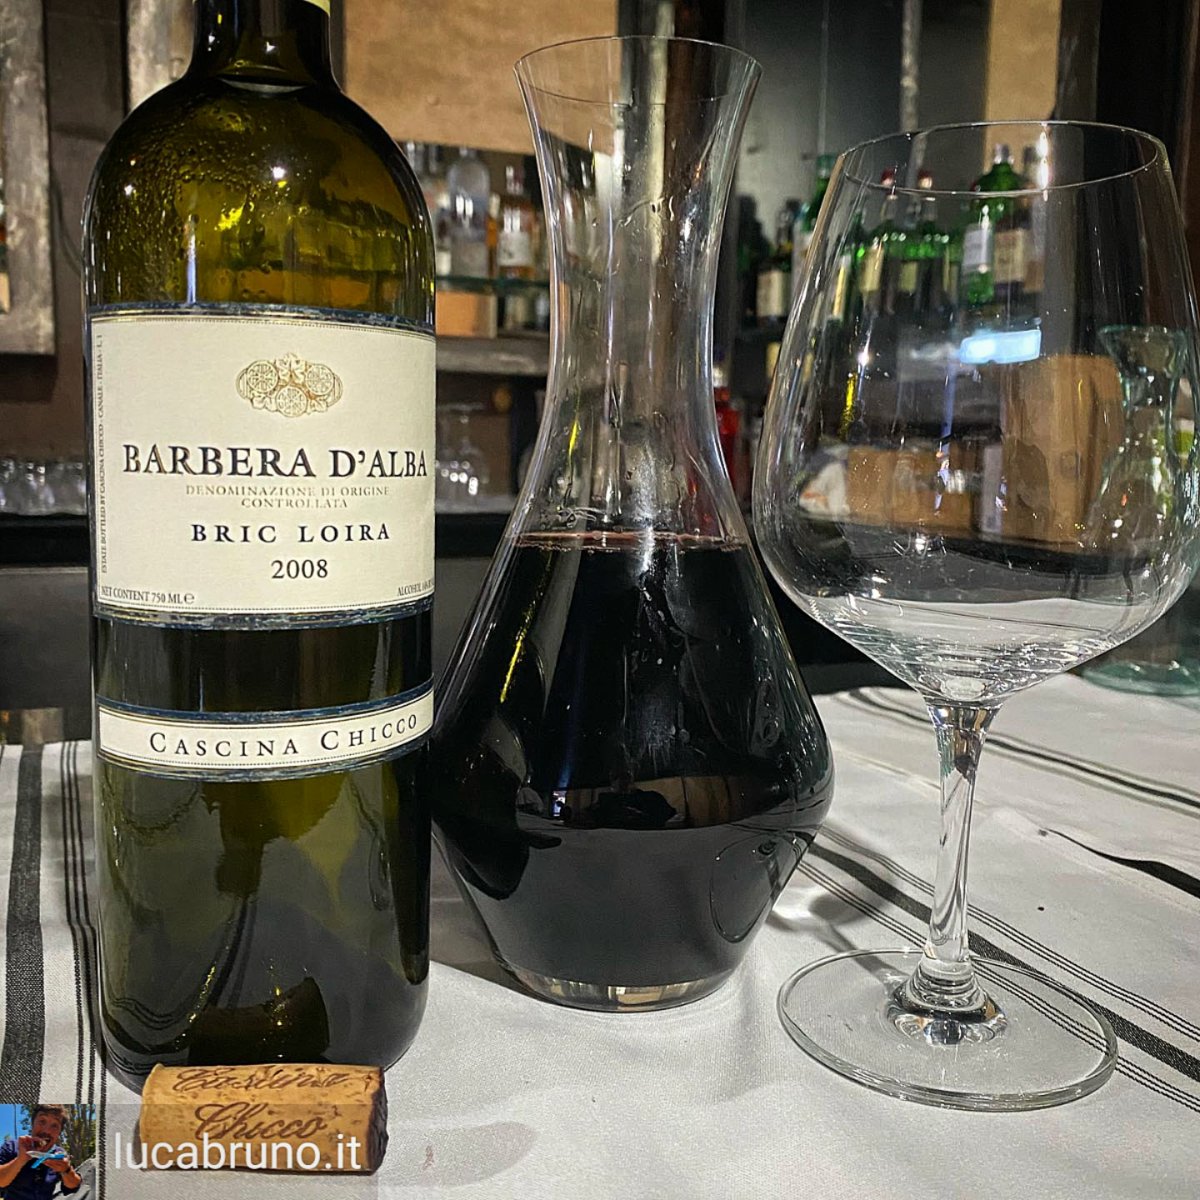 🍷🍇 Elegant 2008 #Barbera d'Alba DOC #Cru #BricLoira 
Thanks @lucabruno.it for this picture 😍
And you... have you ever tasted it?
.
. 
#cascinachicco #winelover #winetime #winelife #roero #UNESCO #castellinaldo #piedmont #barberadalbadoc #oldvintage #winetasting #redwine